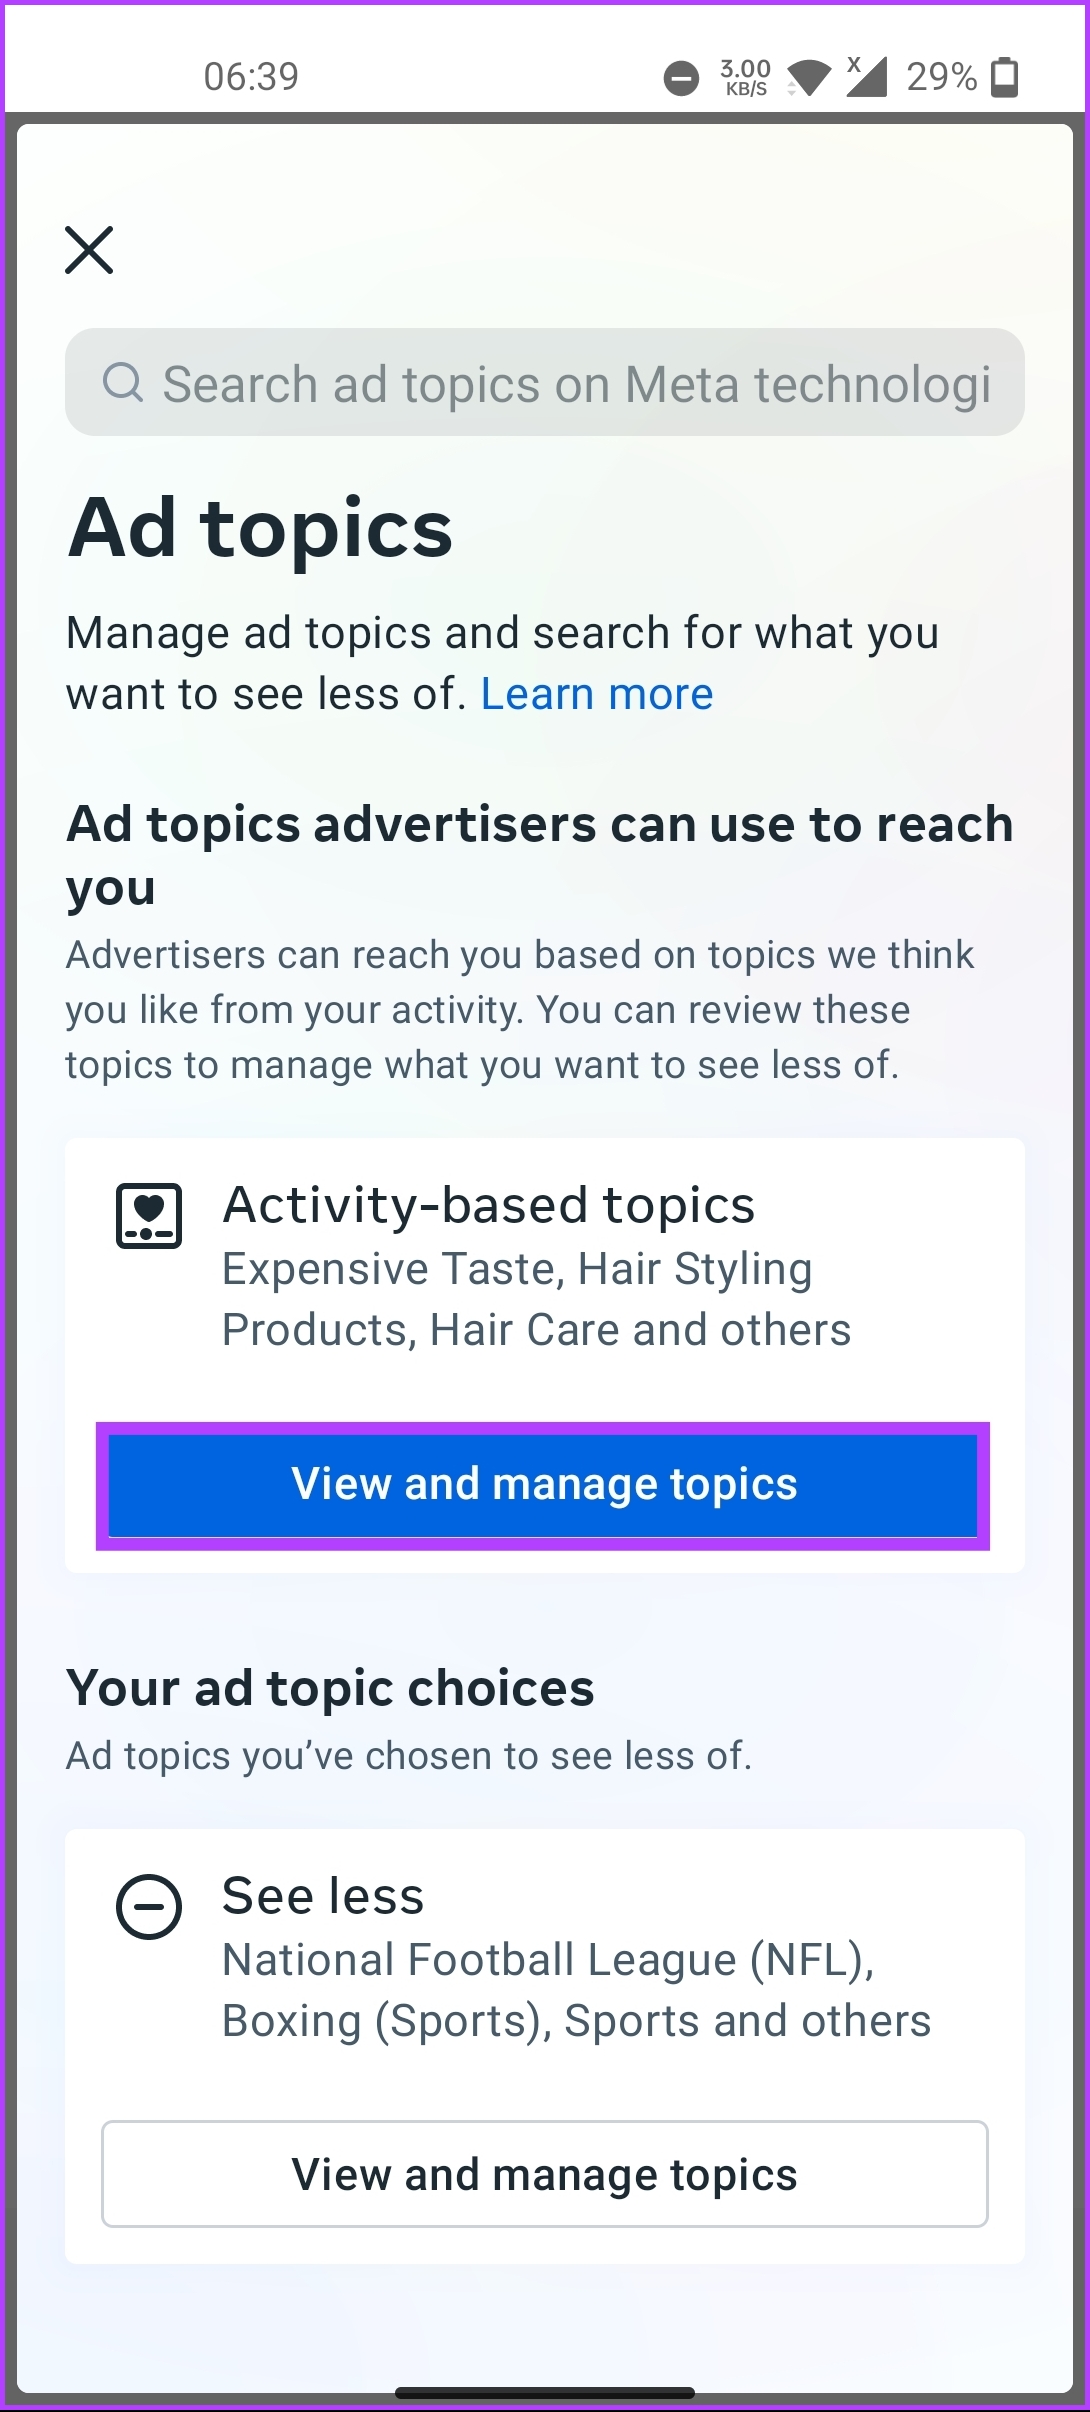 tap on 'View and manage topics'